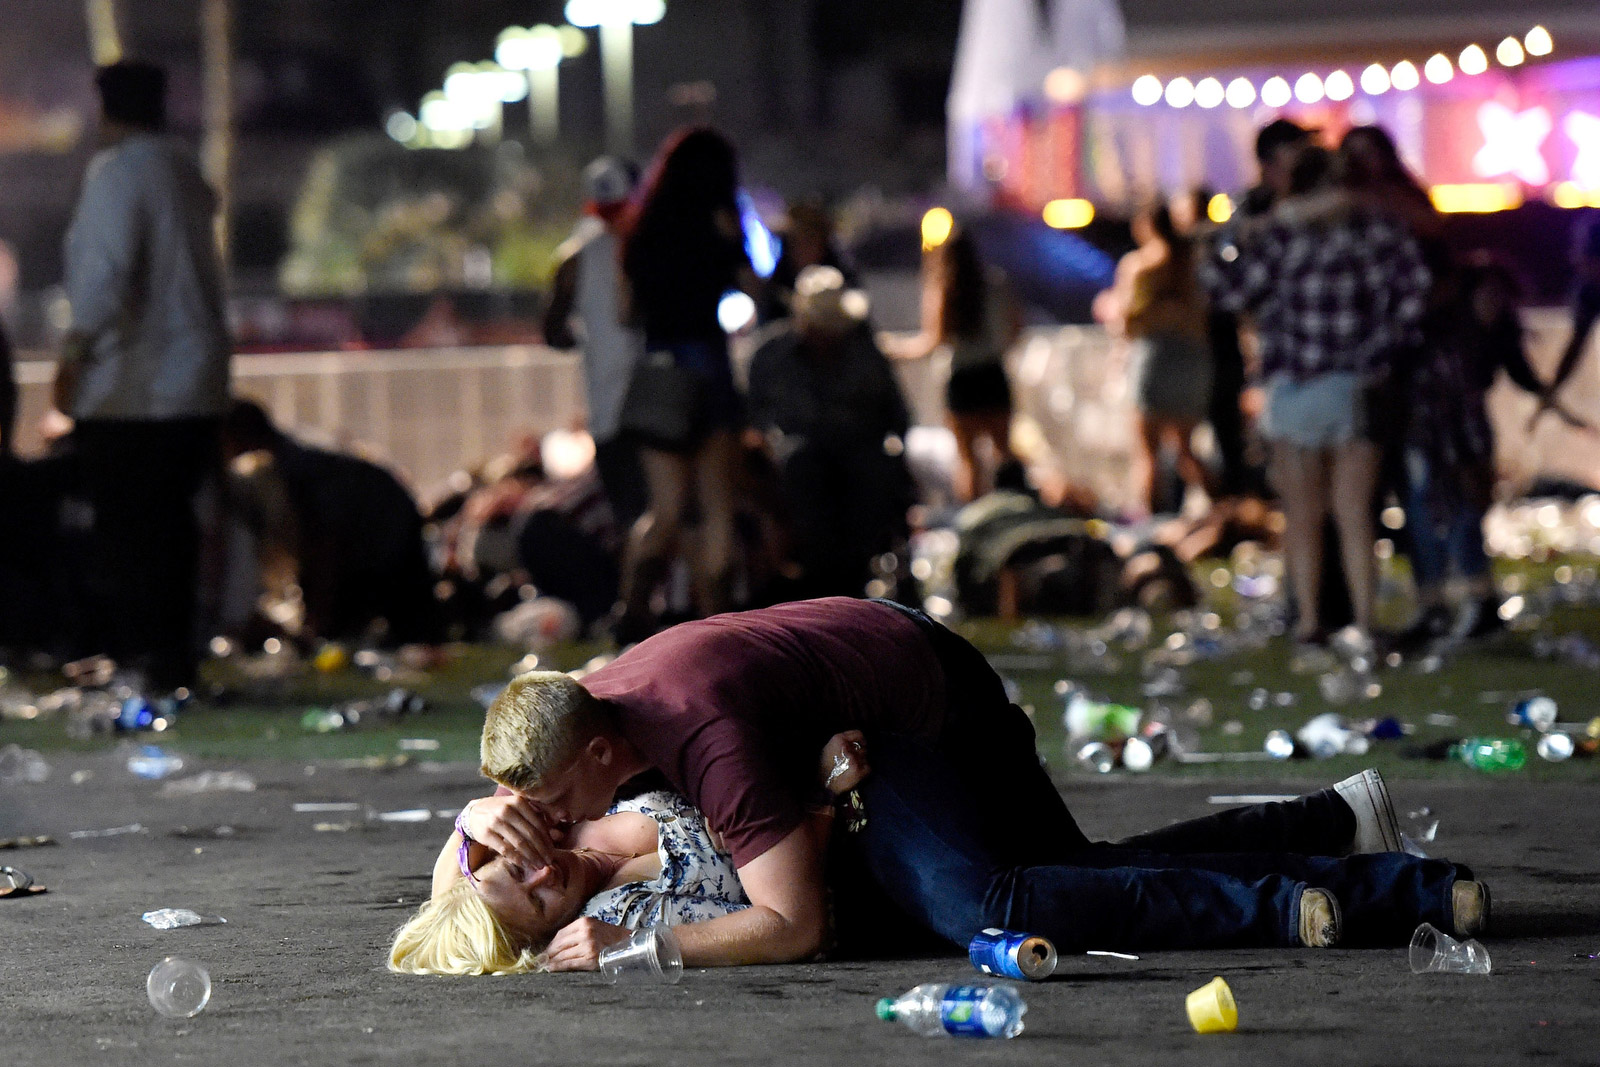 He was there to photograph a concert. It turned into a massacre